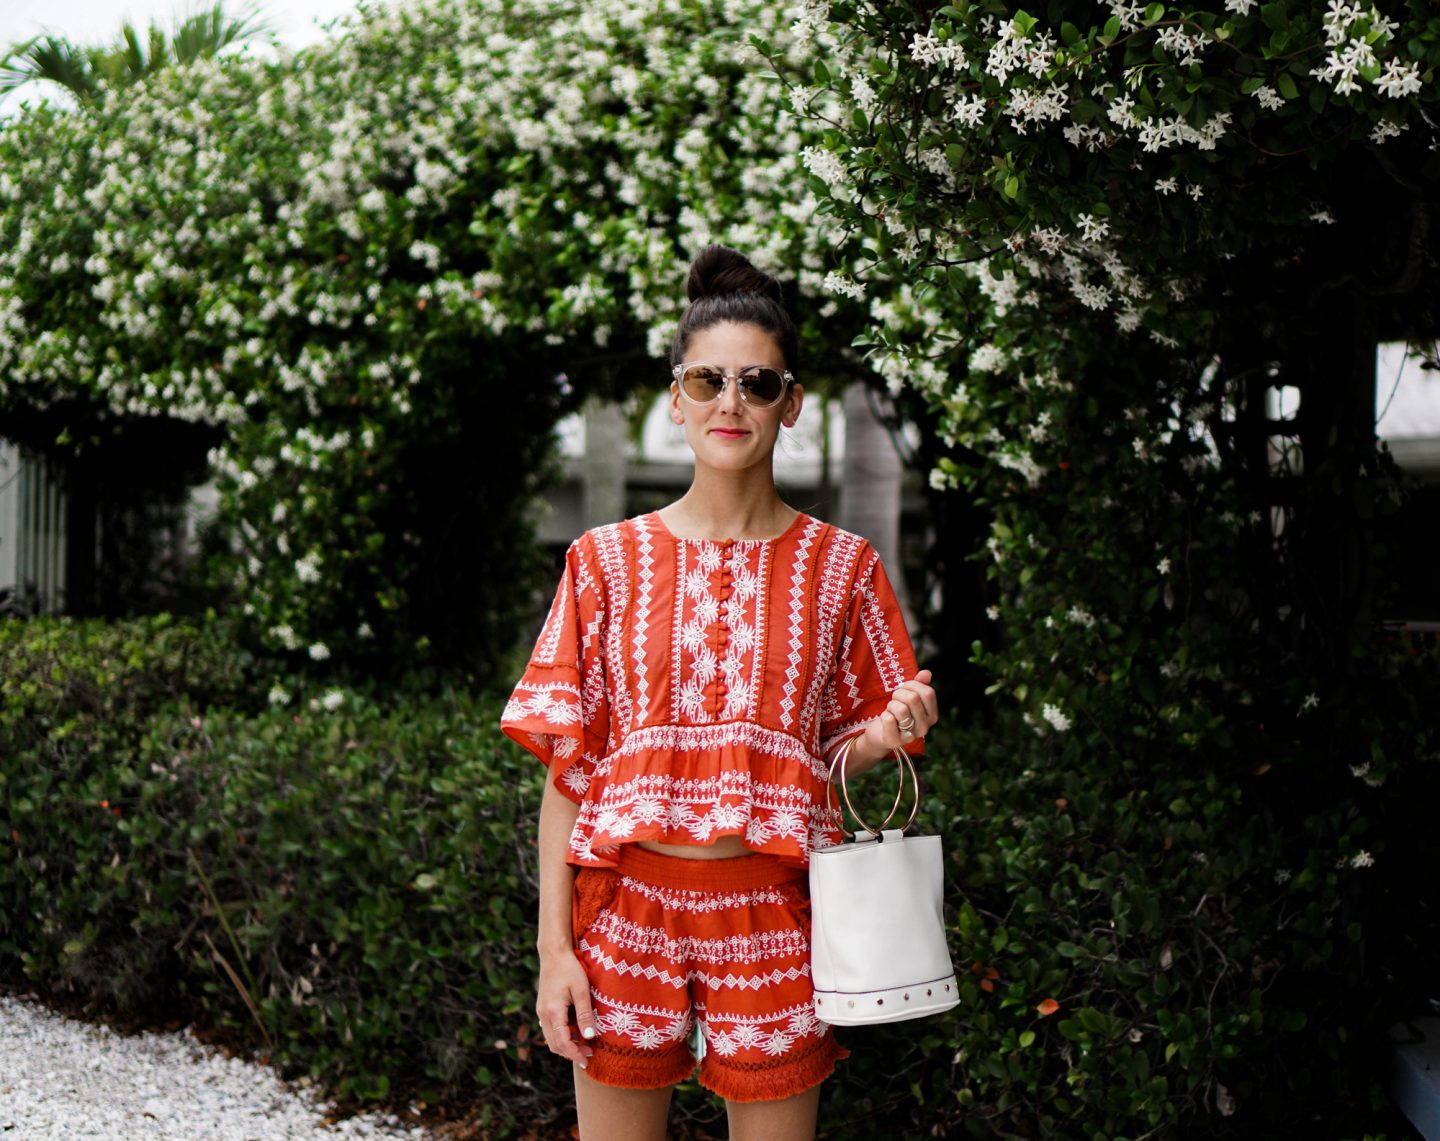 I'm exploring Anna Maria island in the prettiest matching separates (my idea of the perfect beach outfit) from Orchard Mile over on thedandyliarcom.